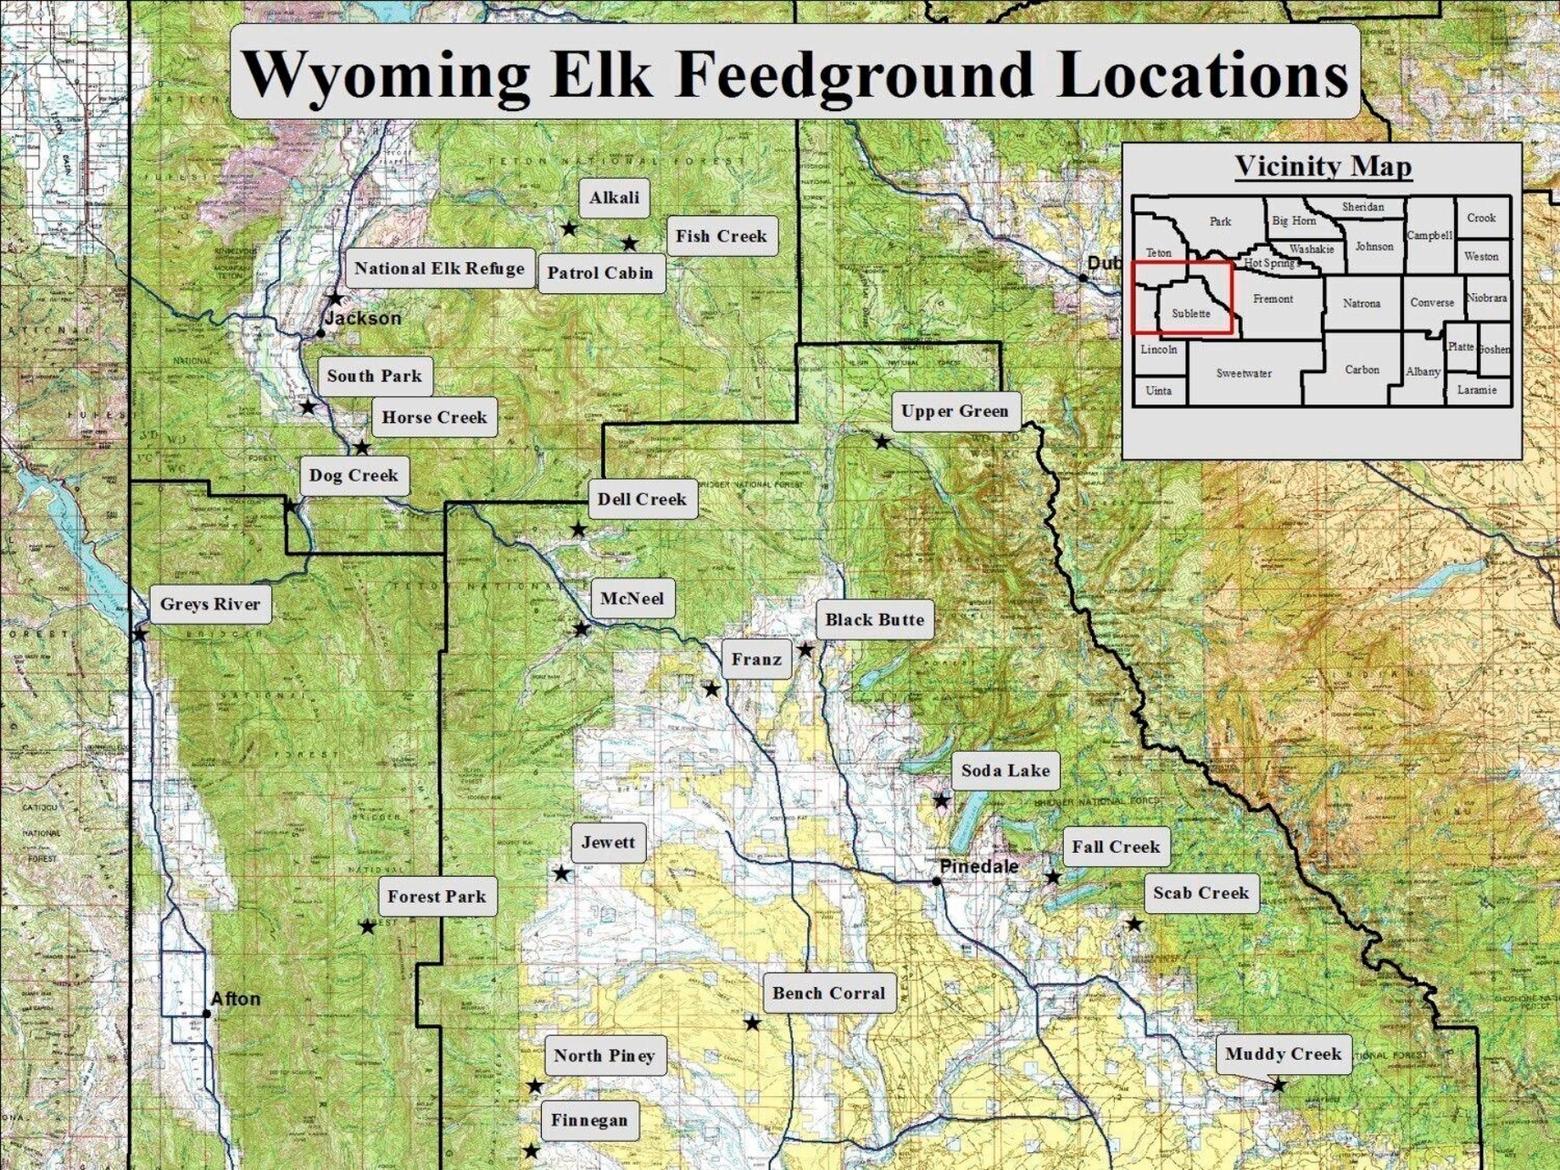 The map above shows the 21 elk feedgrounds that the Wyoming Game and Fish Department currently operates in western Wyoming. The Alkali feedground is slated for decommission this year. Map courtesy Wyoming Game and Fish Department